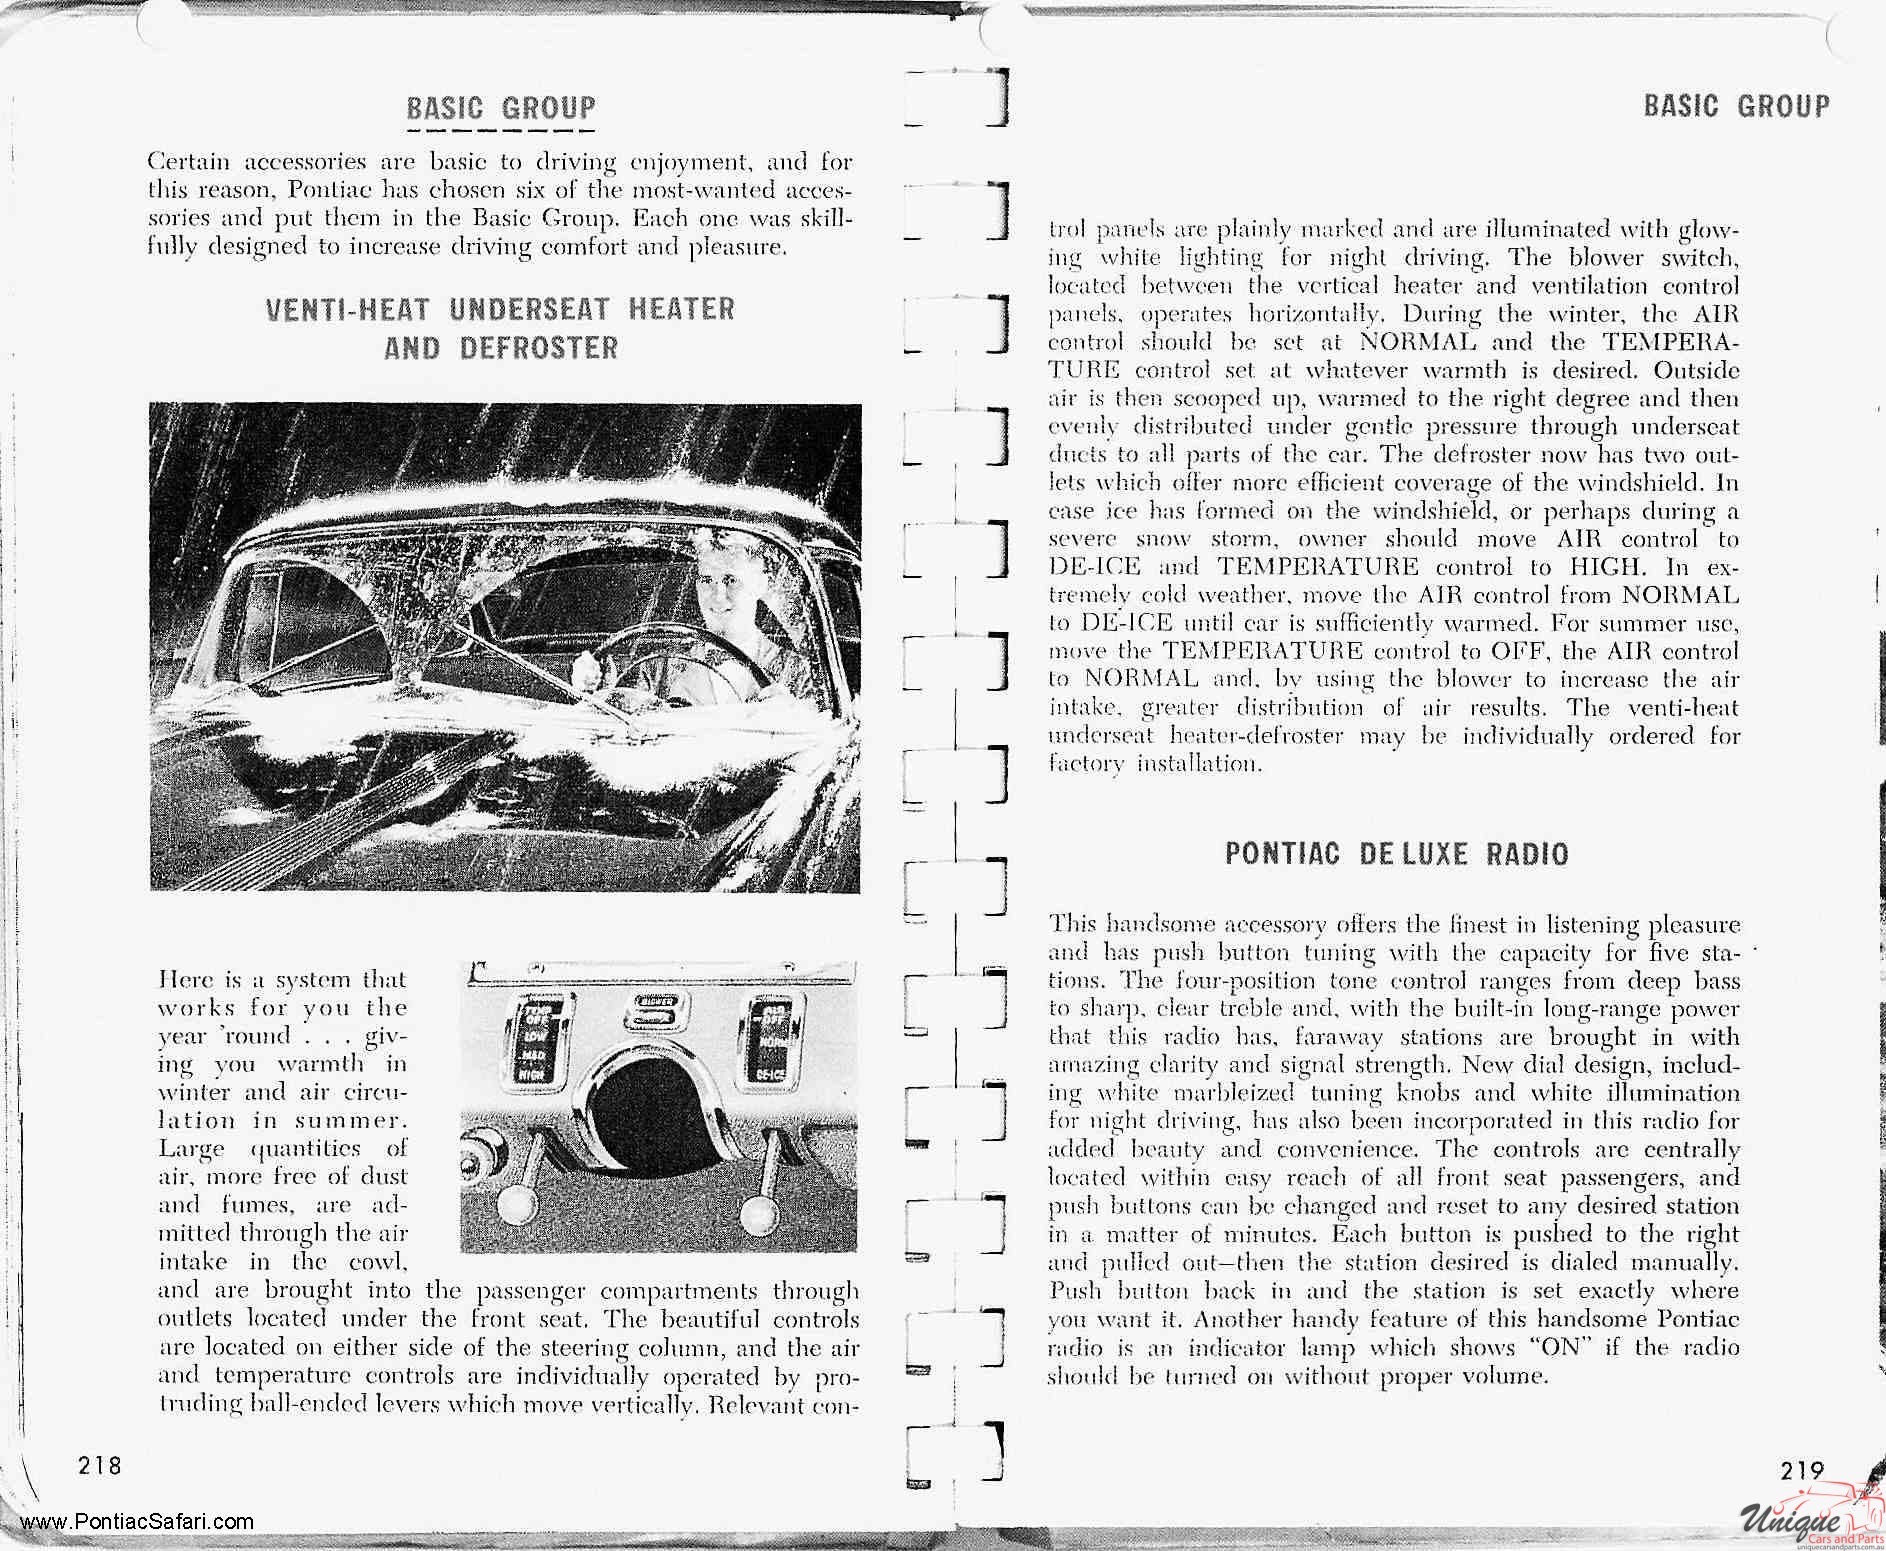 1956 Pontiac Facts Book Page 11